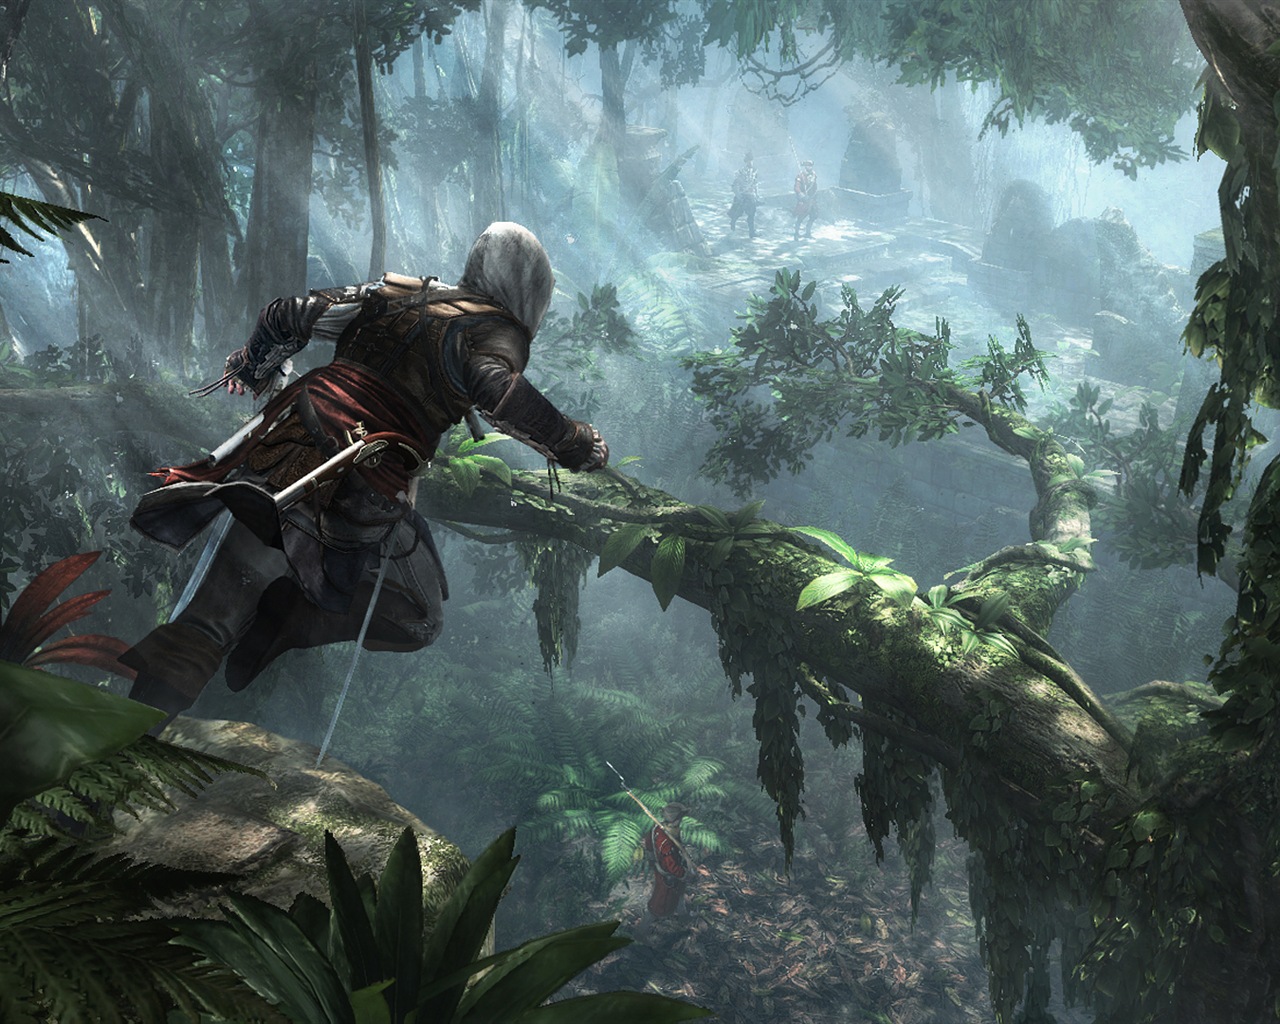 Creed IV Assassin: Black Flag HD wallpapers #15 - 1280x1024